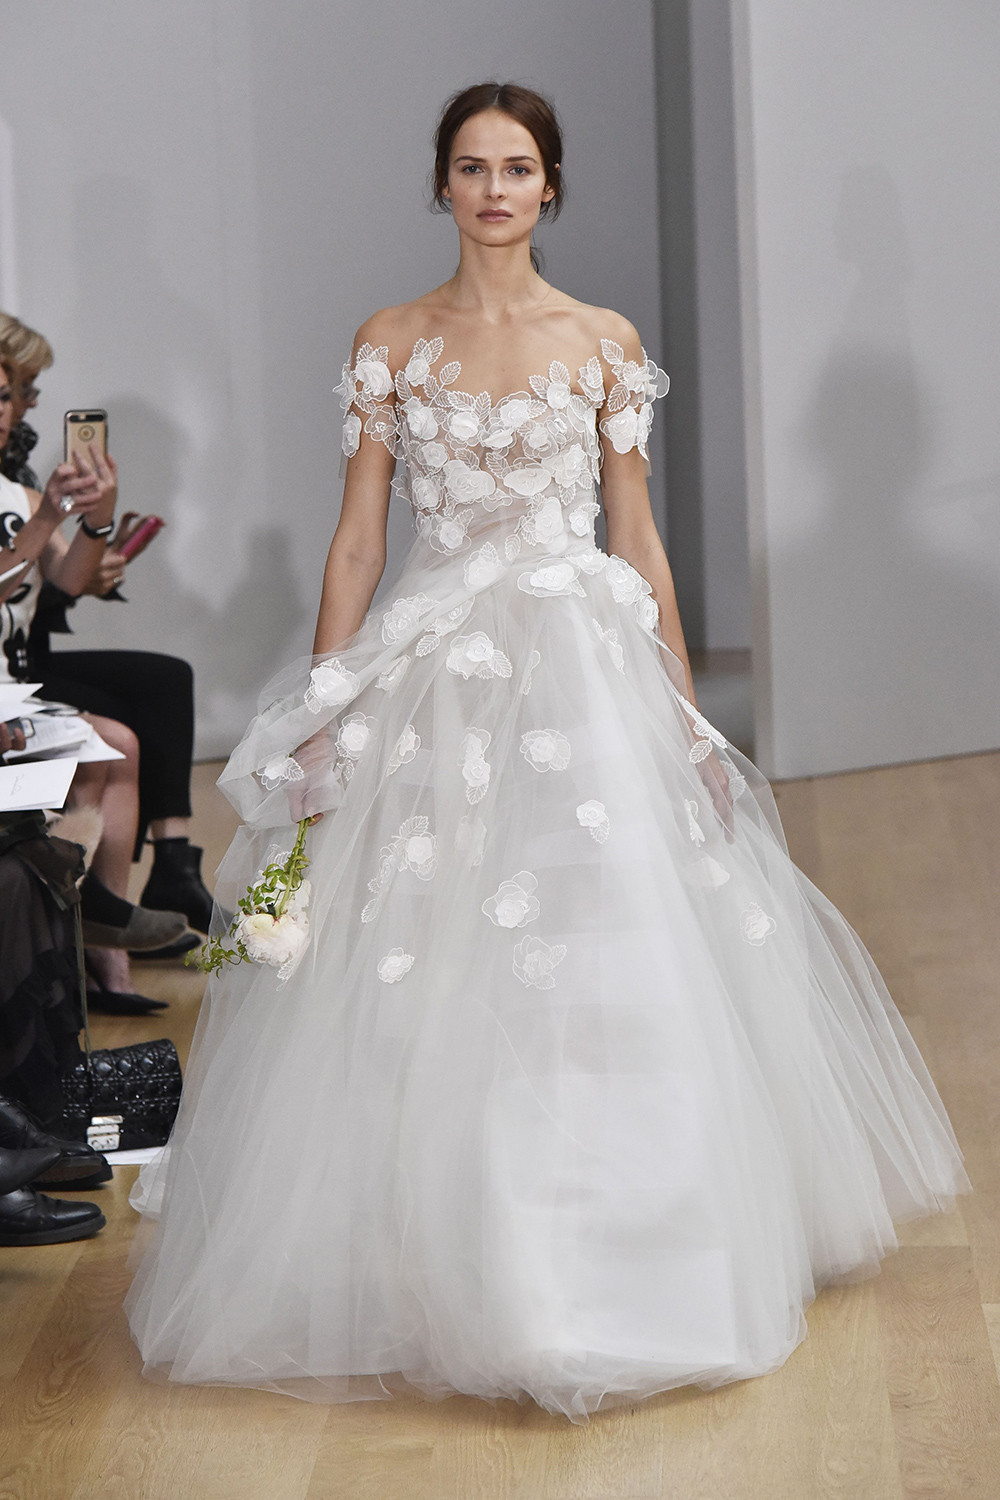 Most Beautiful Wedding Gowns
 The most beautiful wedding dresses from Bridal Fashion Week